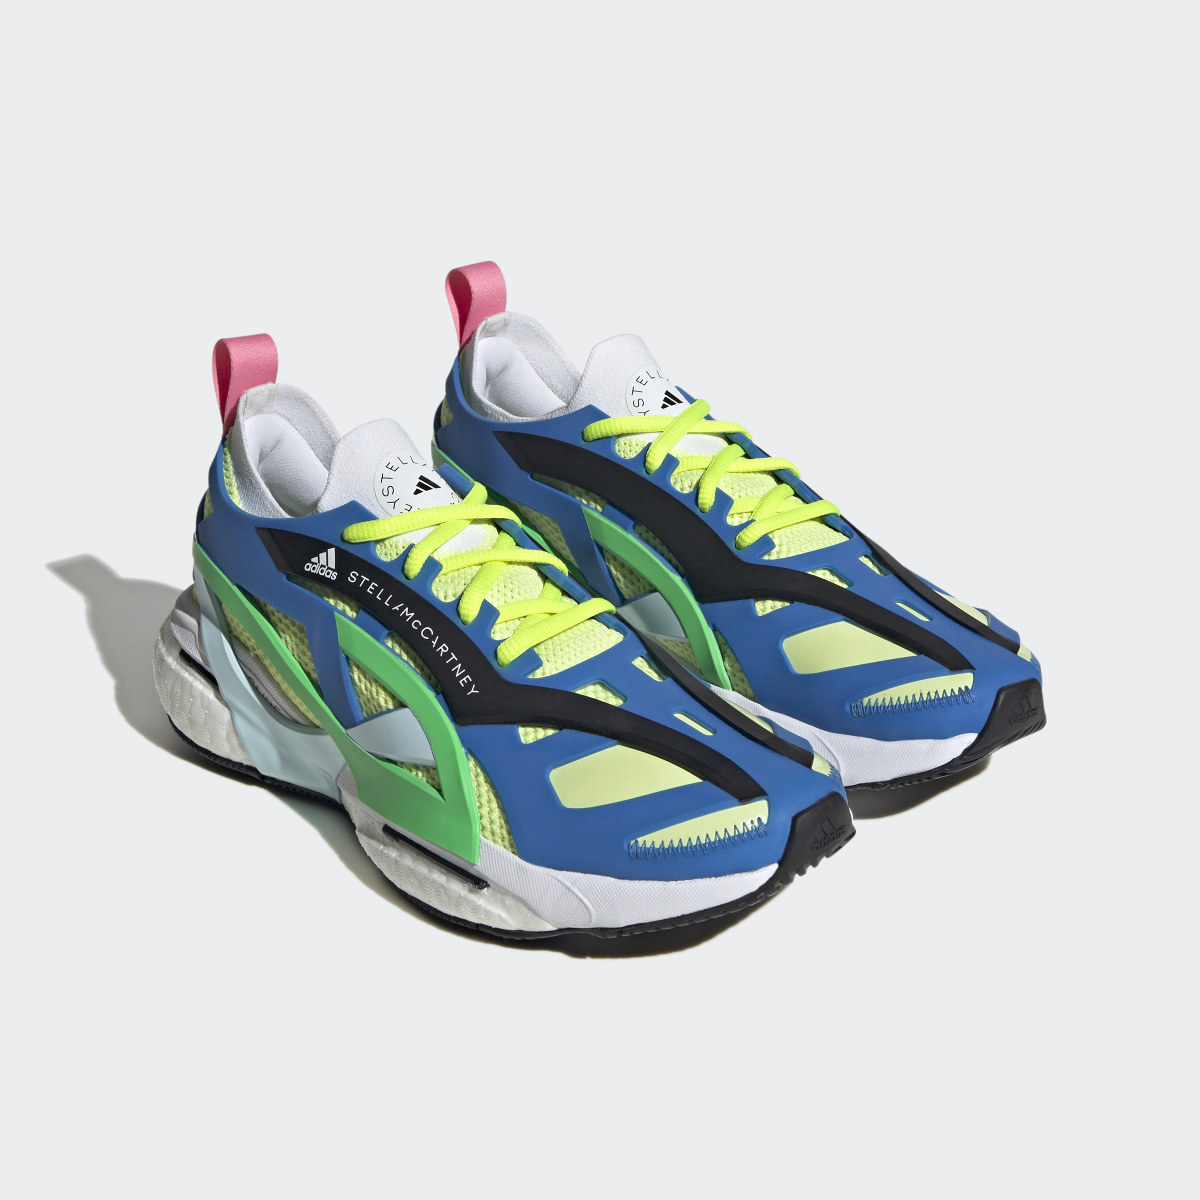 Adidas by Stella McCartney Solarglide Running Shoes. 5